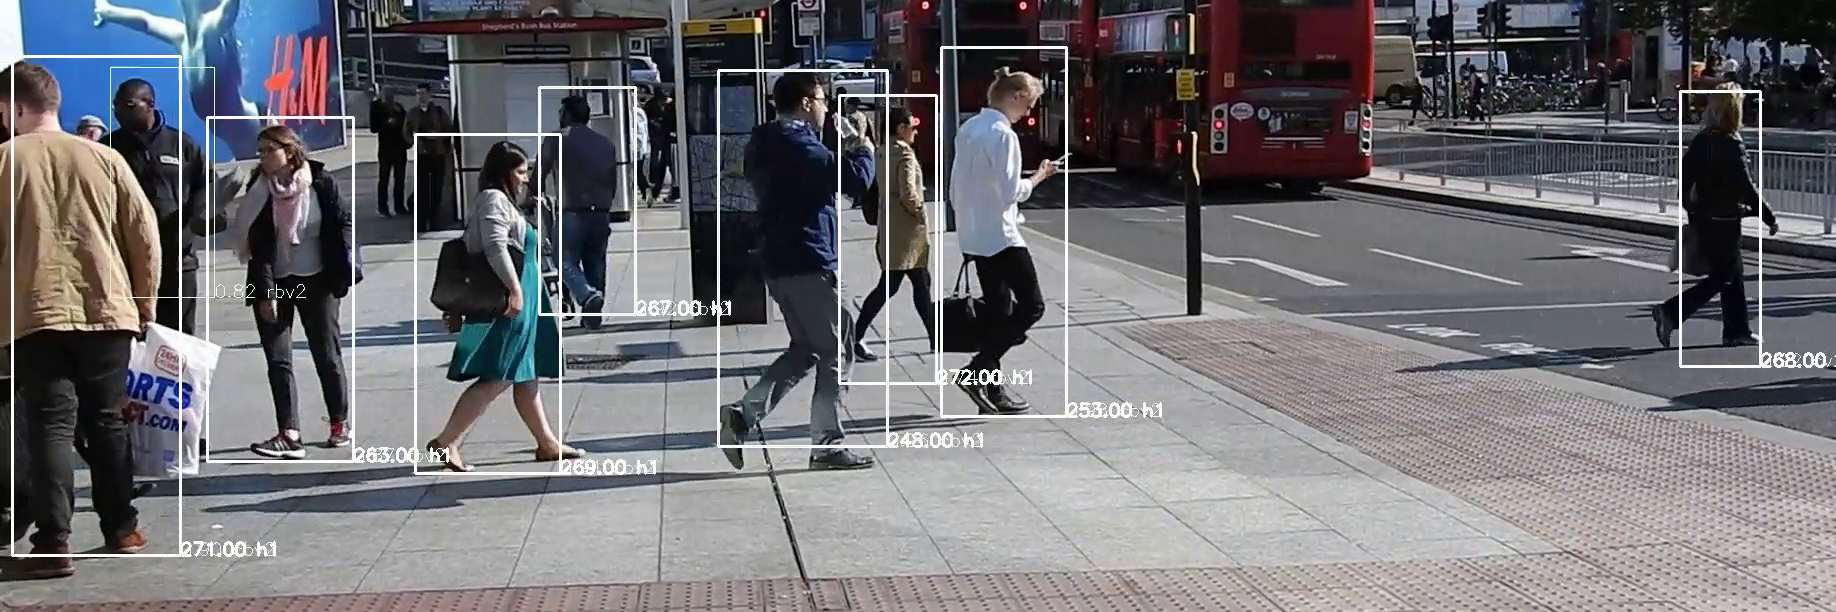 Counting pedestrians from video